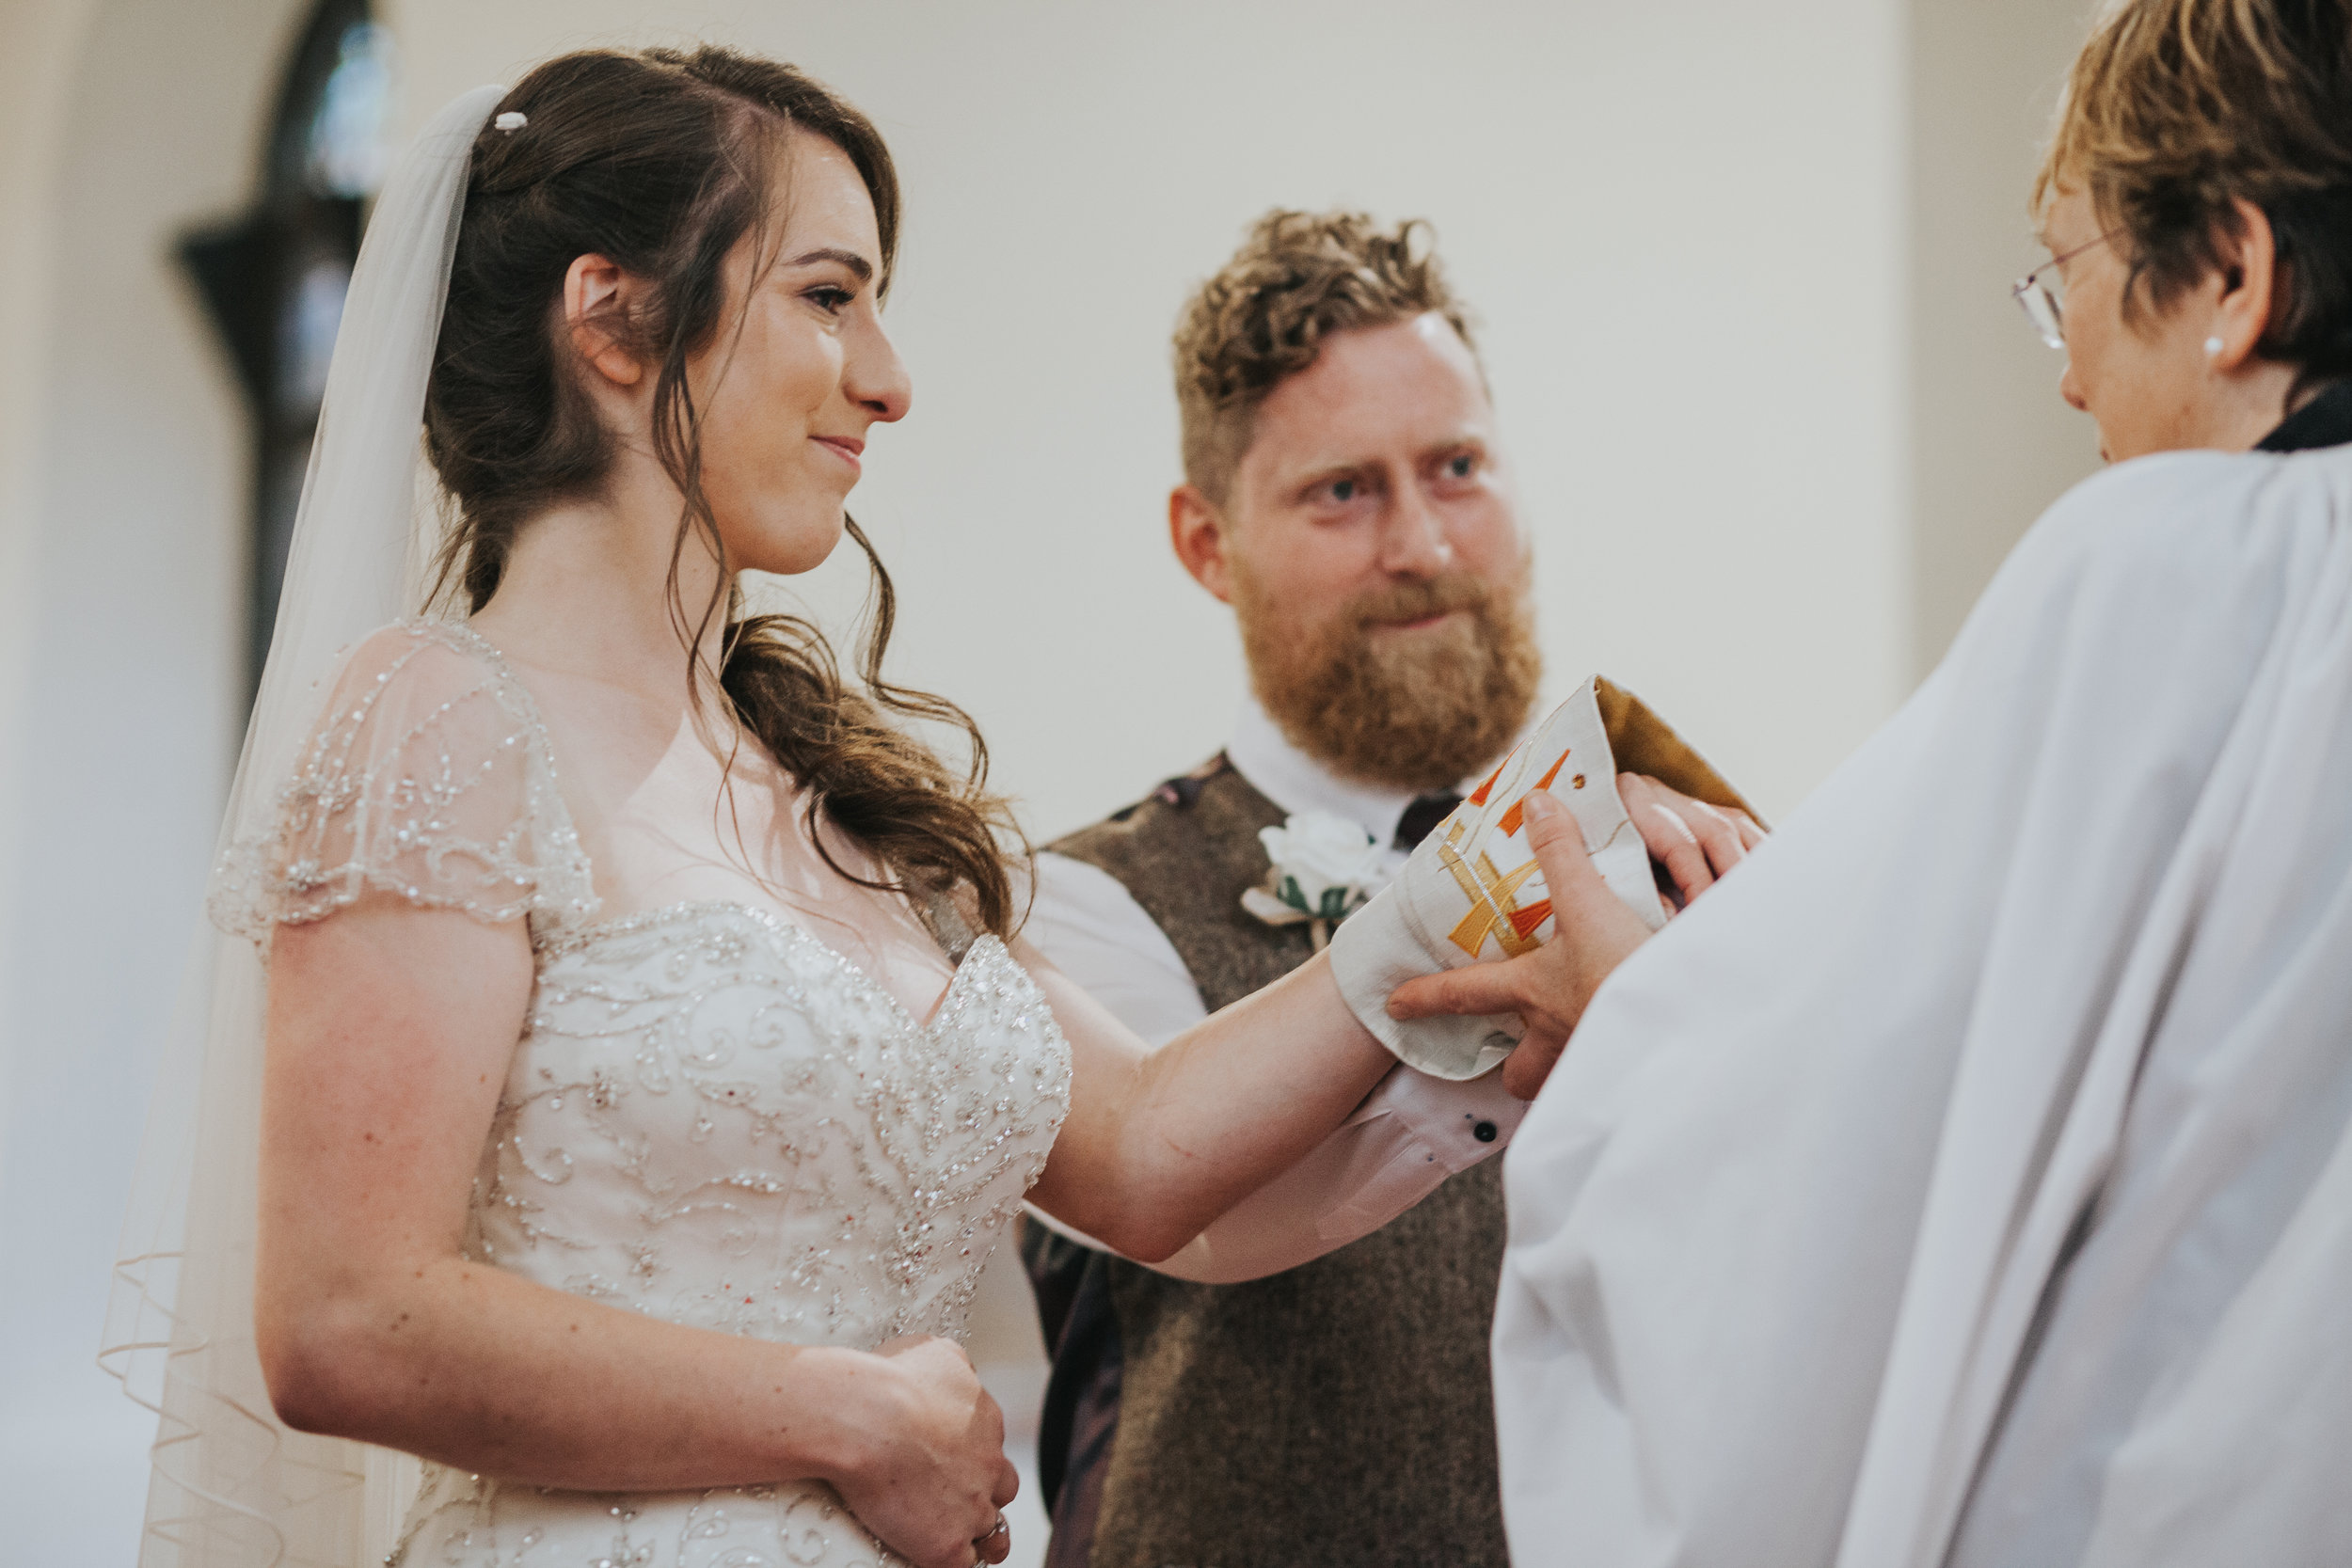  Vicar wraps couples hands in fabric.&nbsp; 